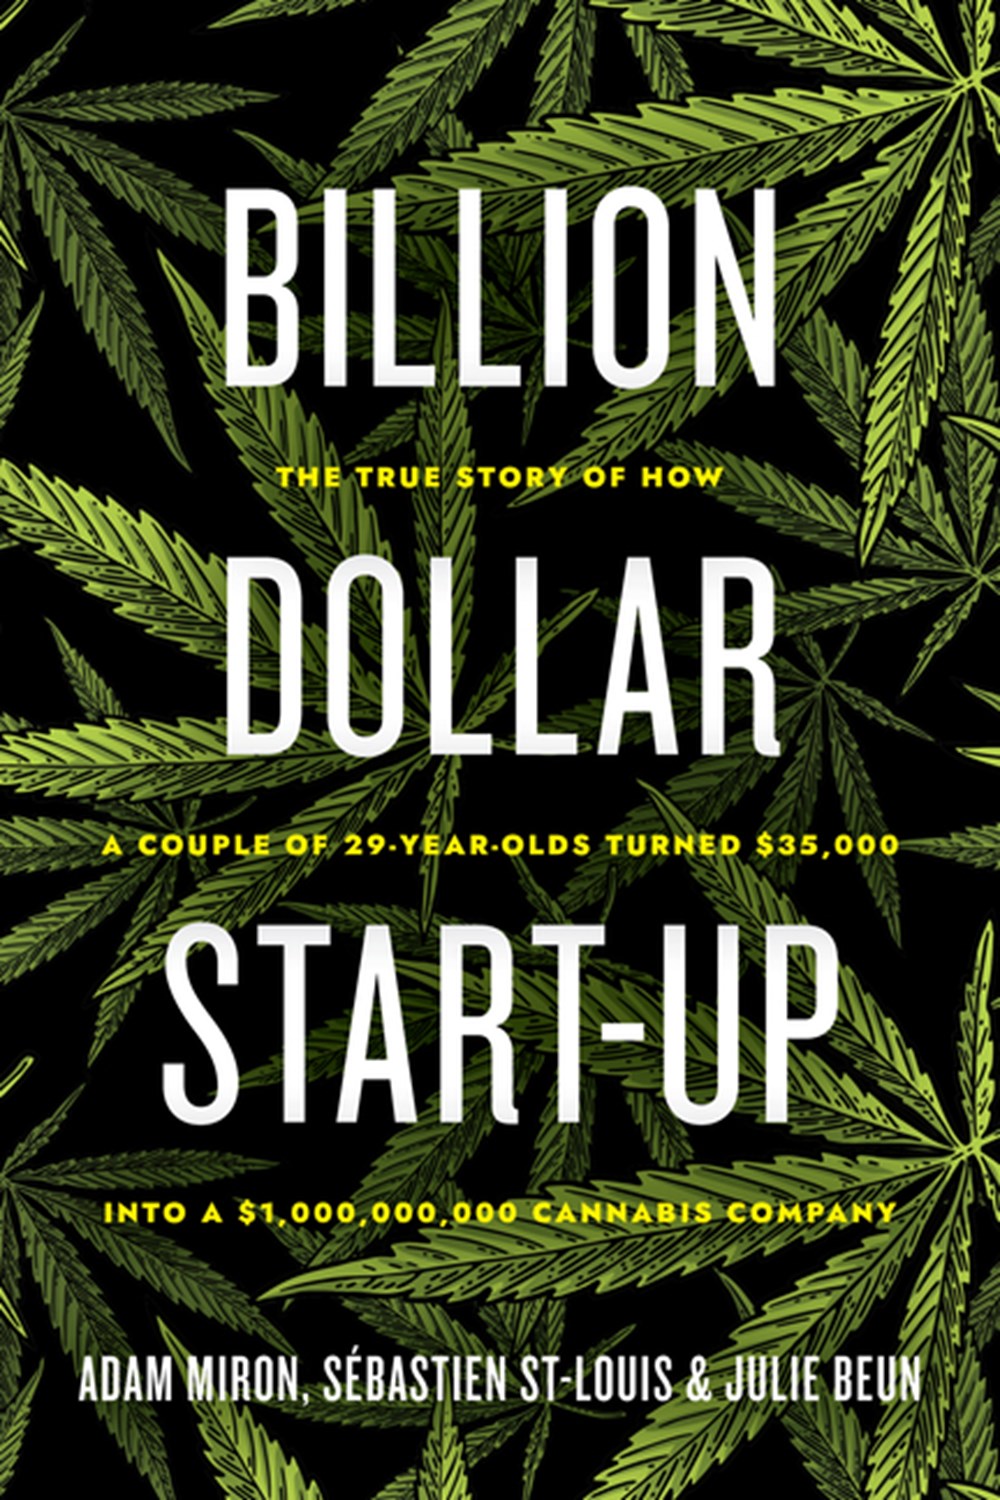 Billion Dollar Start-Up The True Story of How a Couple of 29-Year-Olds Turned $35,000 Into a $1,000,